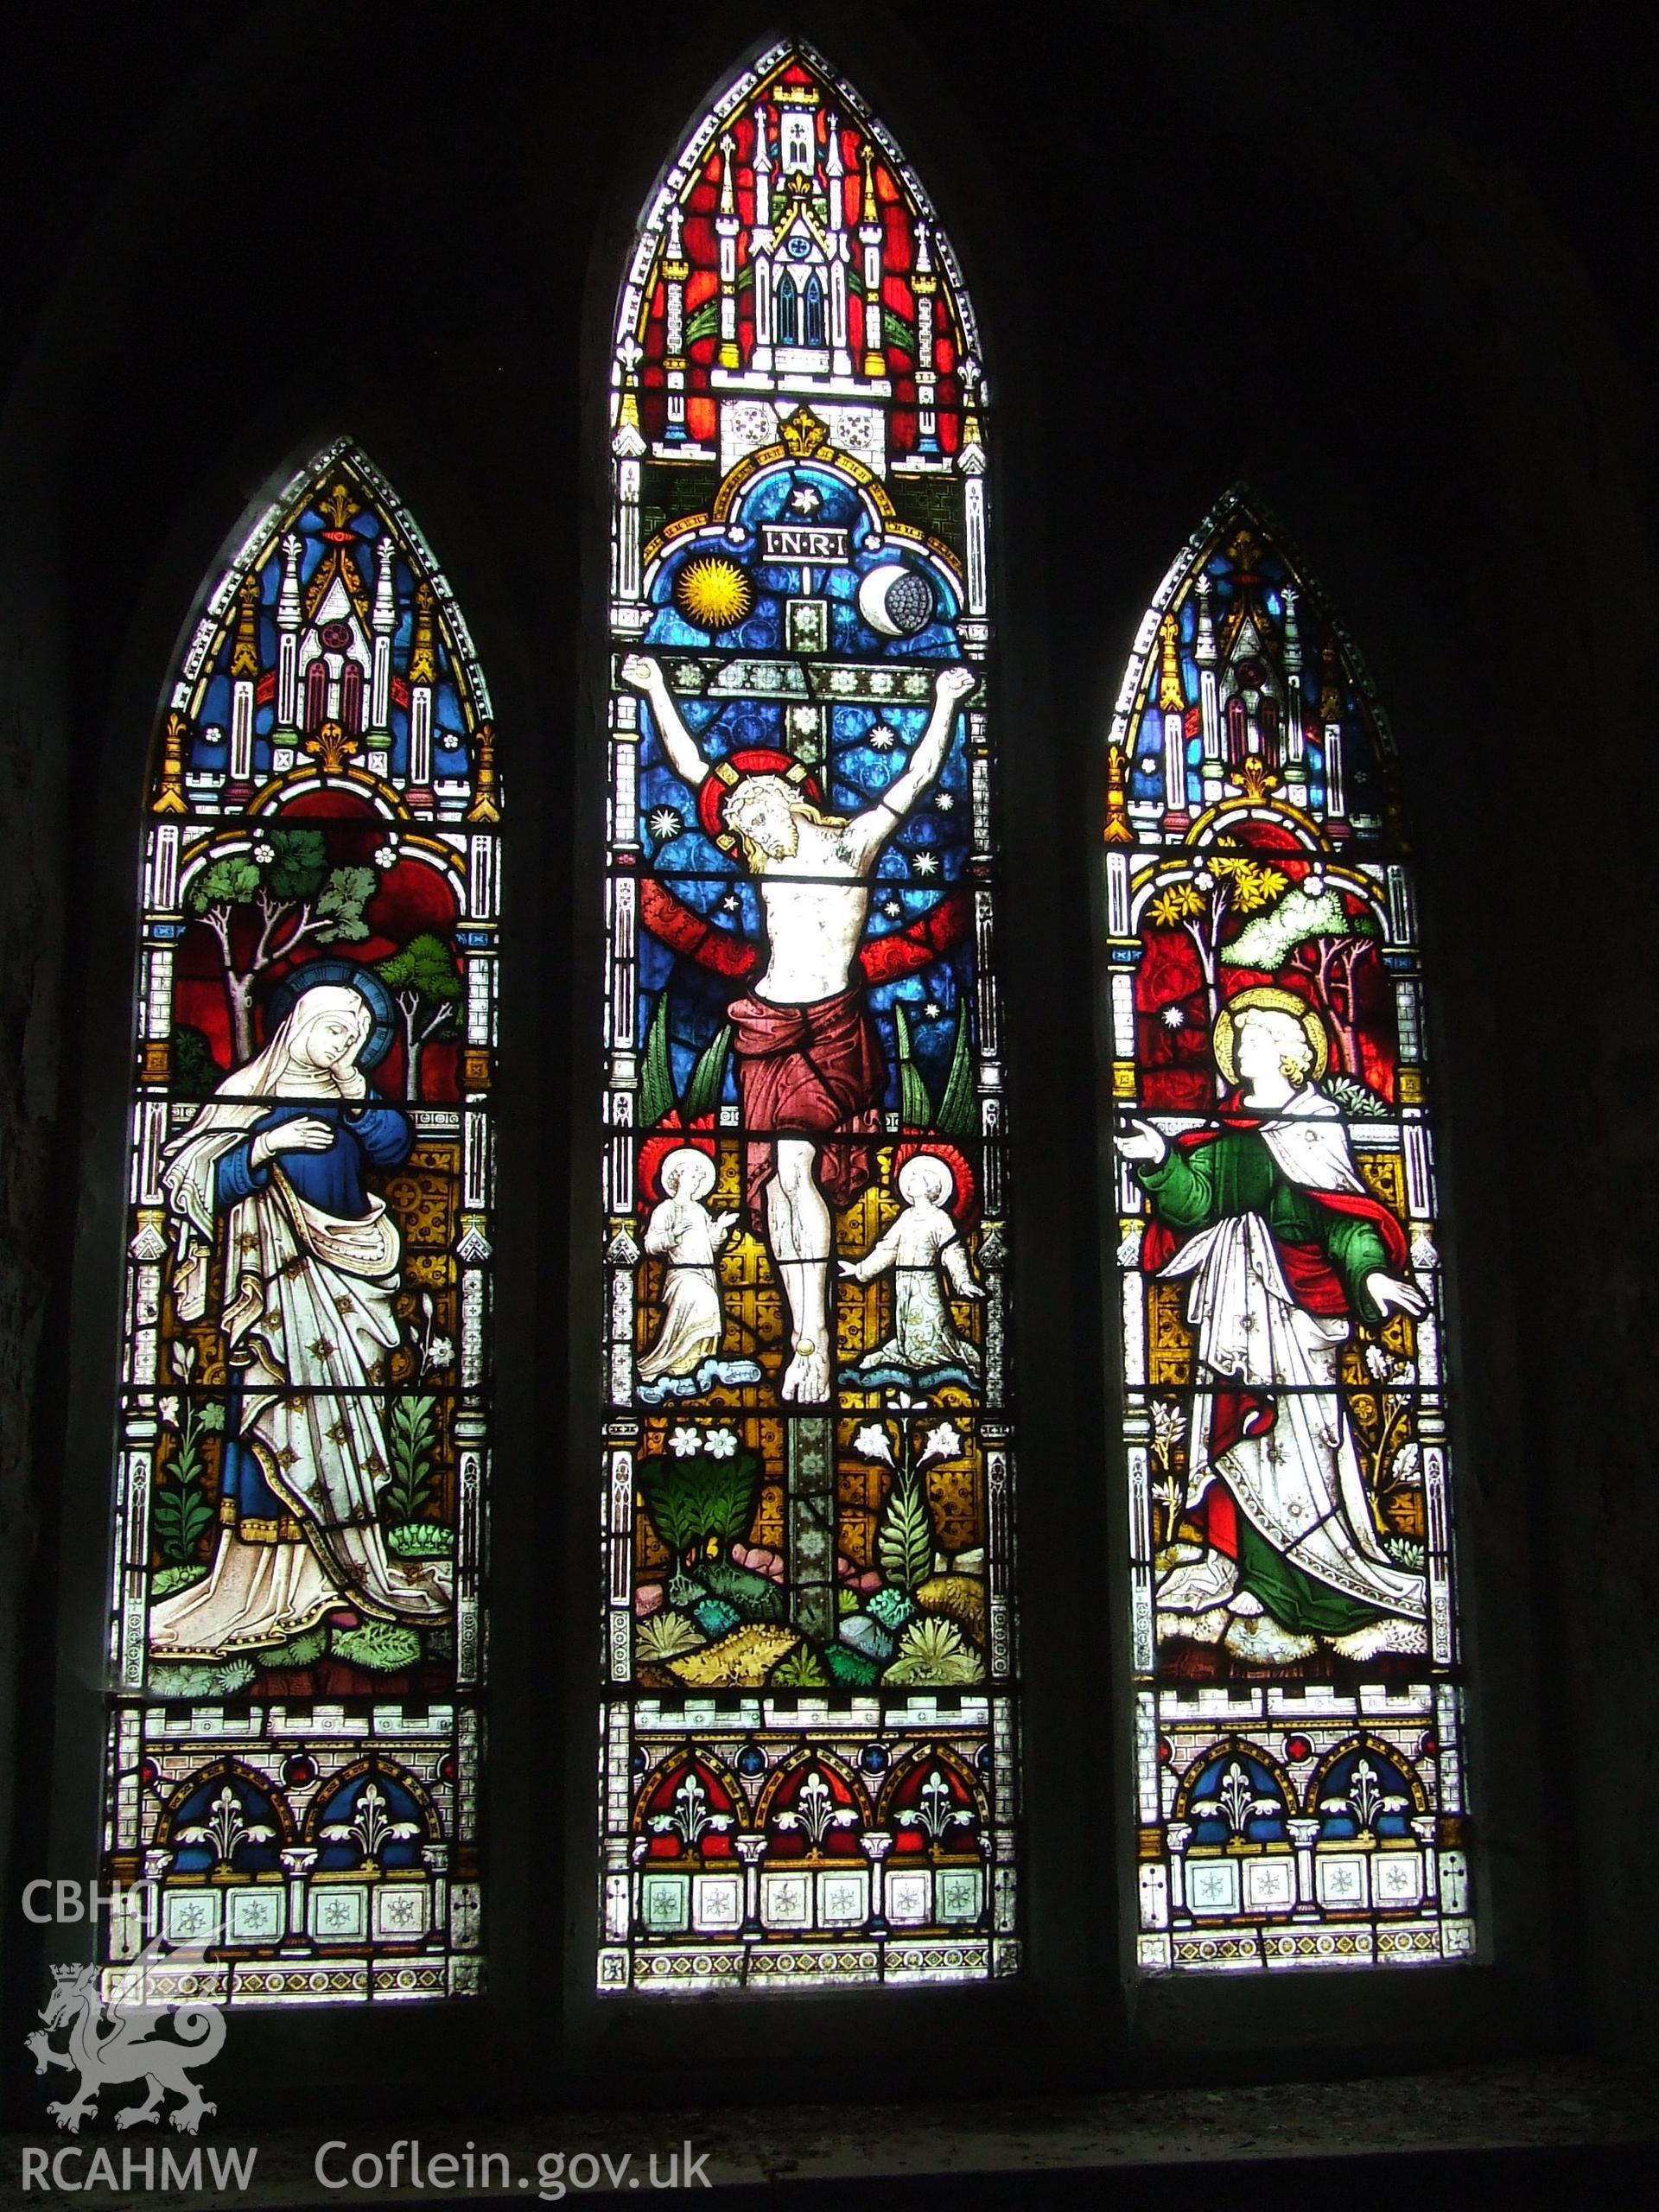 Digital colour photograph showing interior - stained glass east window, Castell Dwyran church.